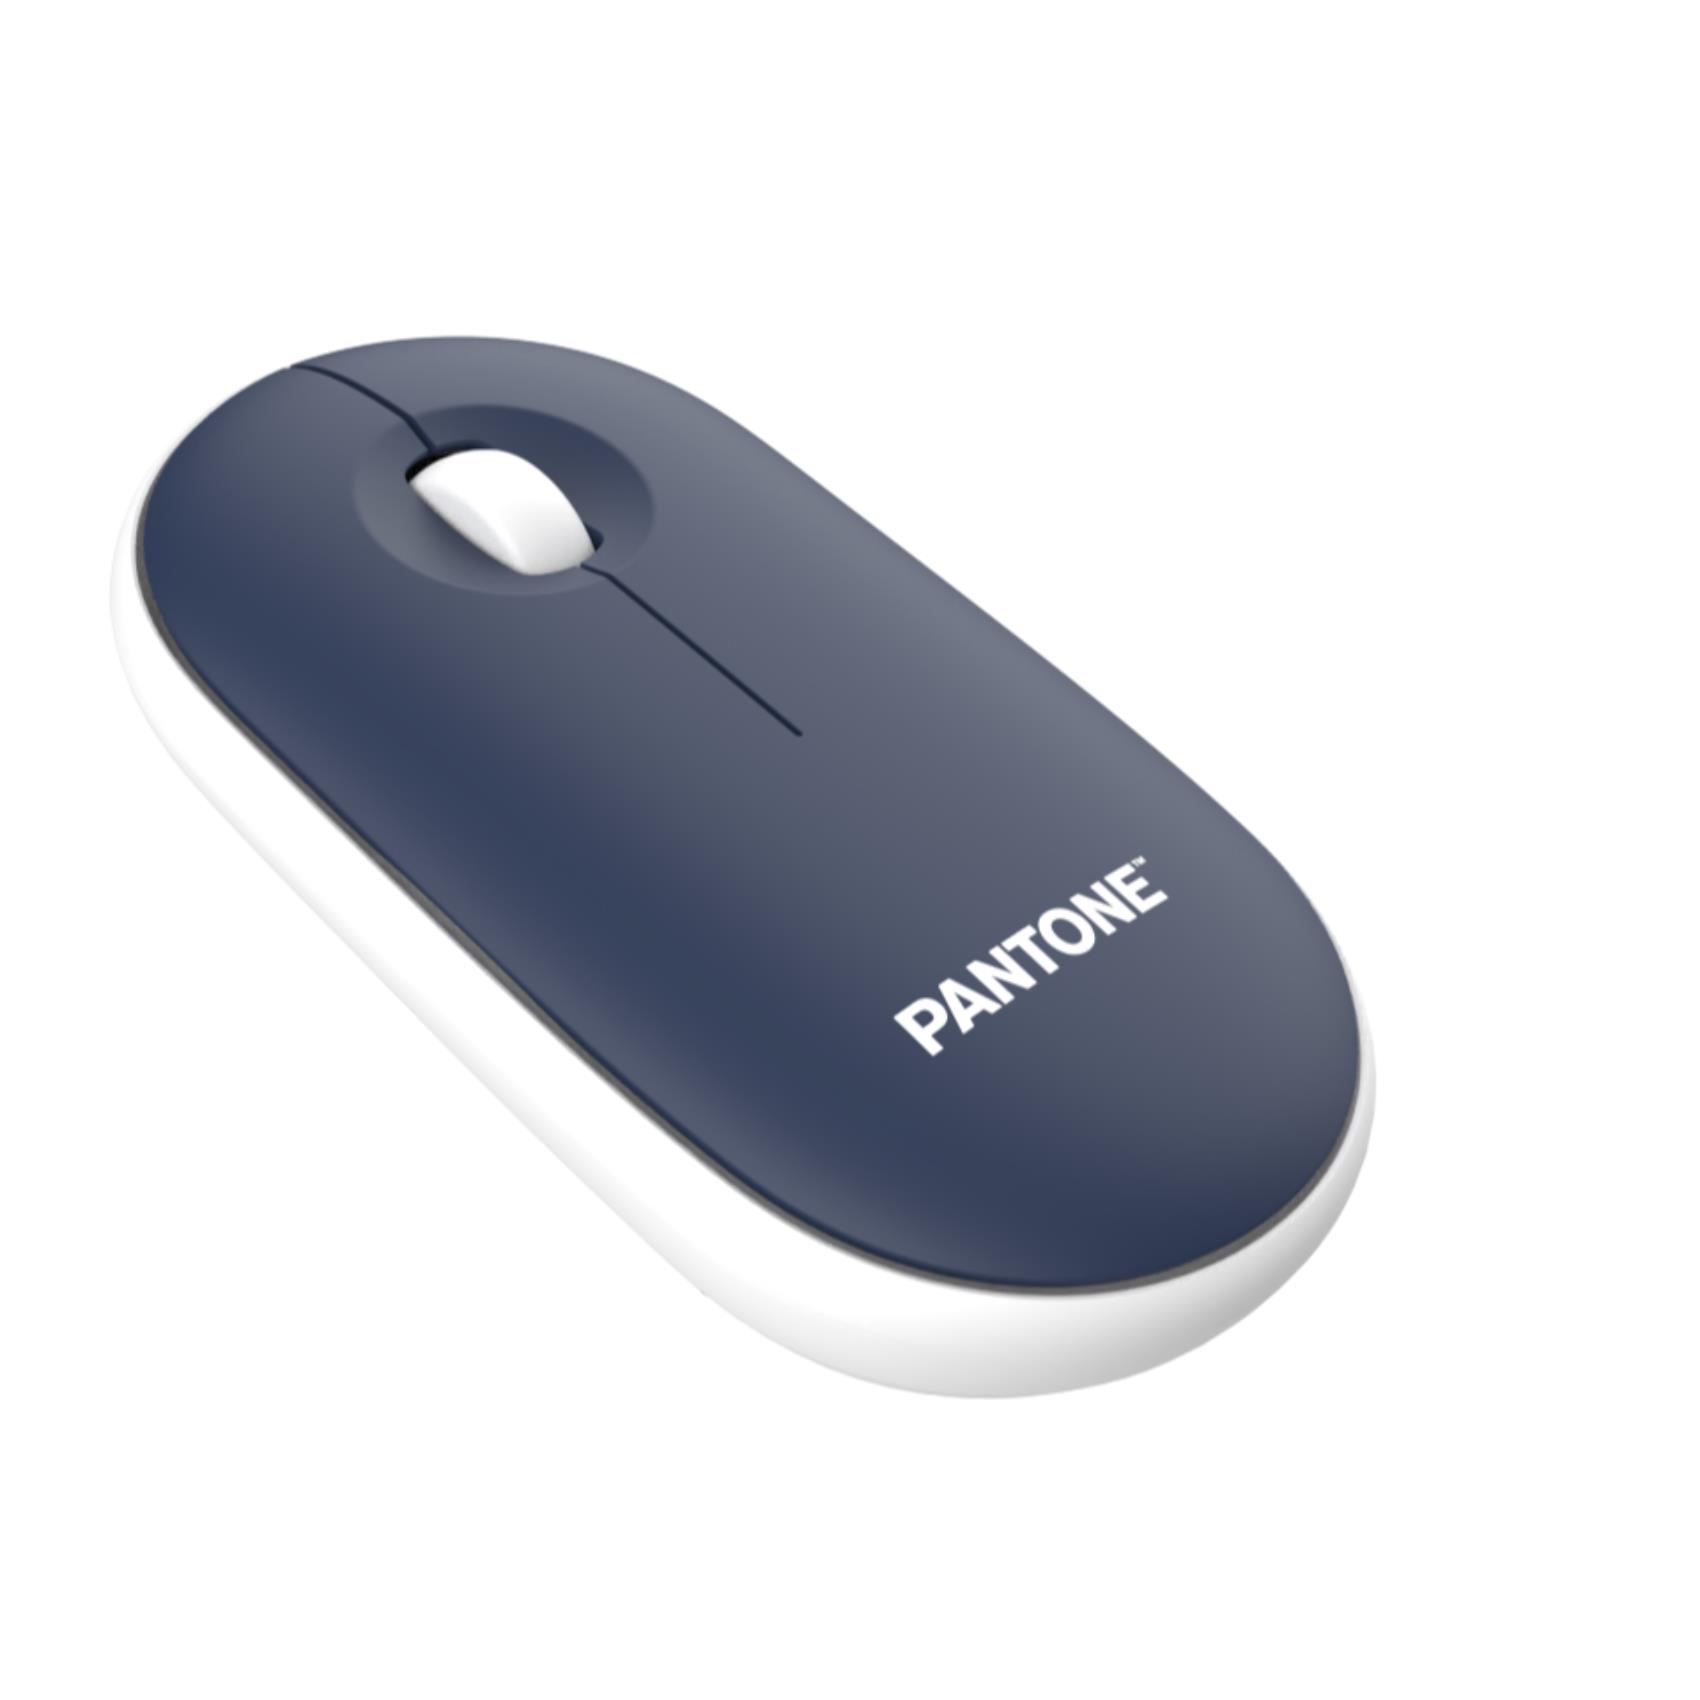 PANTONE - Mouse Wireless [IT COLLECTION]